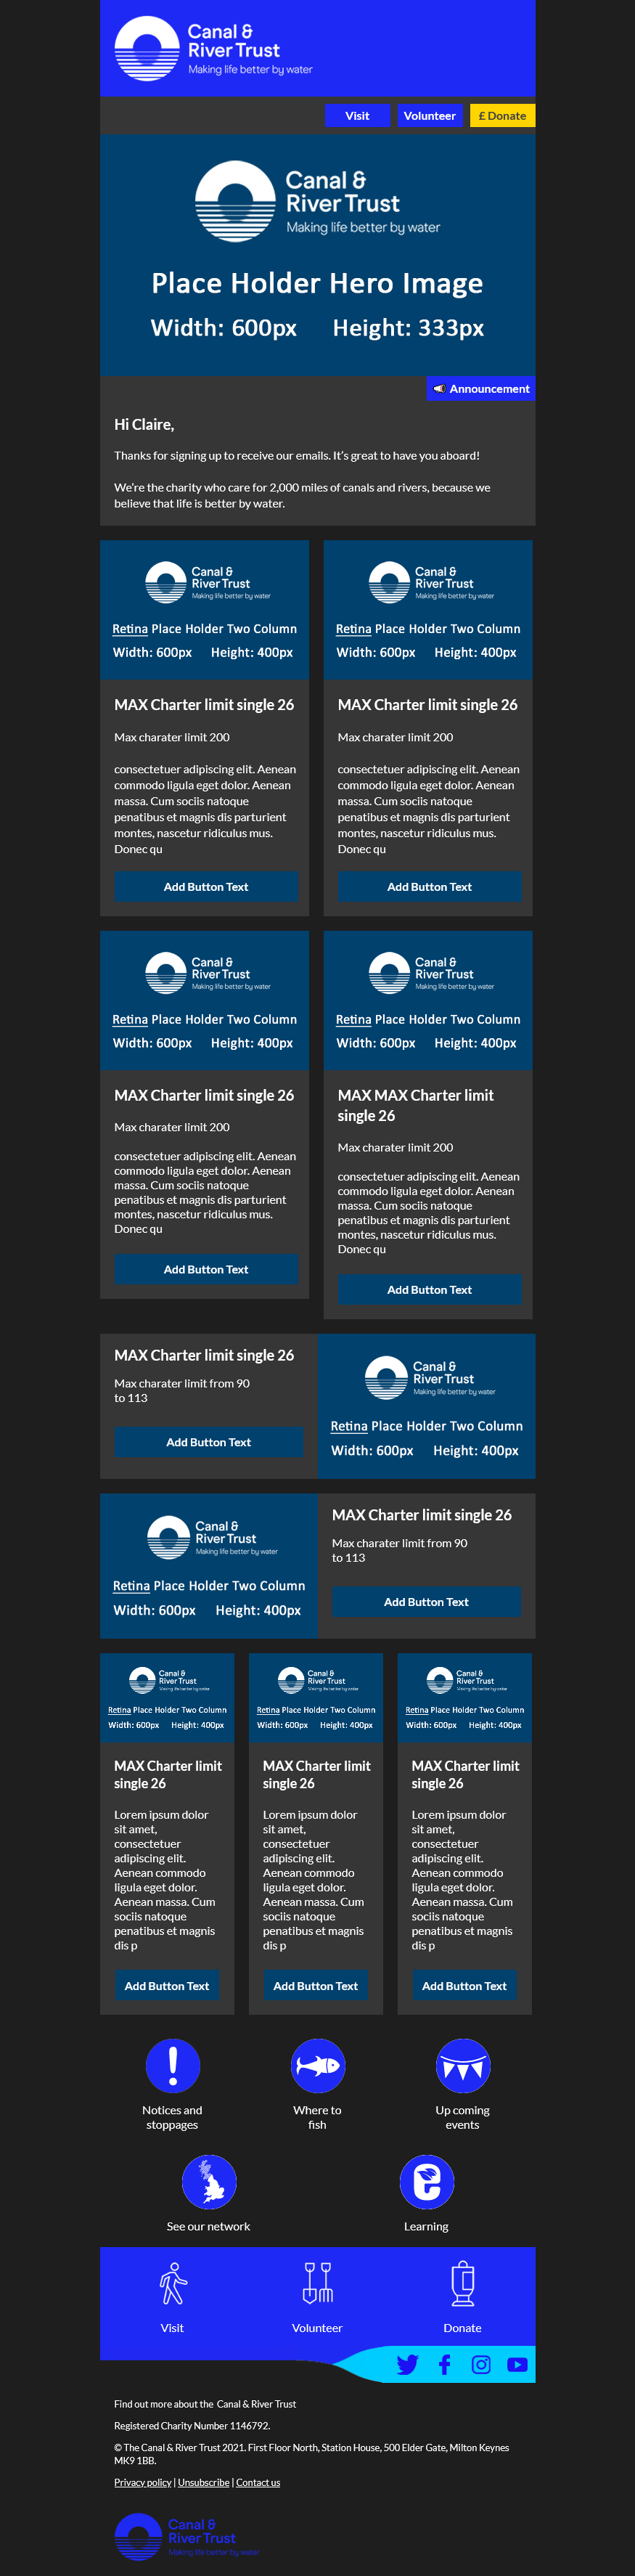 Email Templates Created For Canal River Trust Marketing Charity Dark mode on desktop design